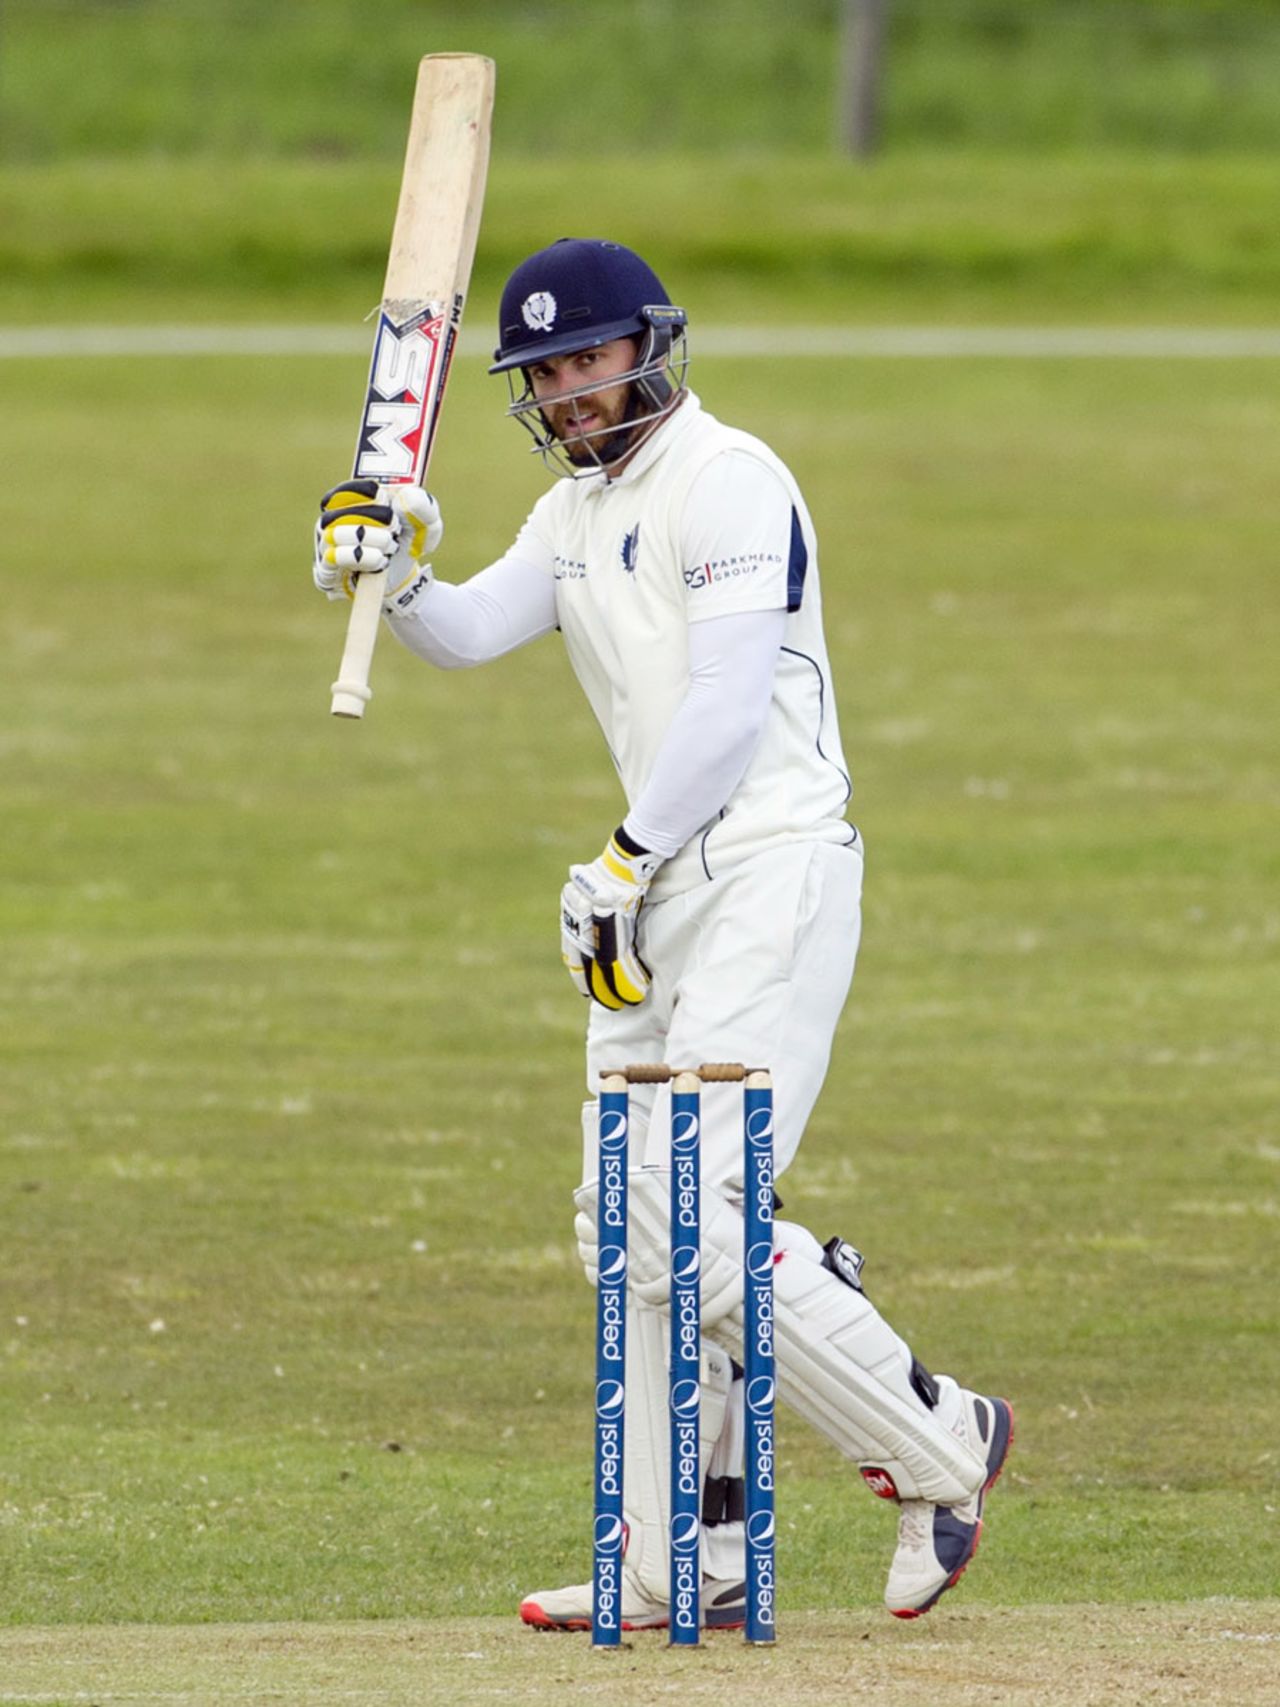 Scotland captain Preston Mommsen raises his bat after reaching 50, Scotland v Afghanistan, ICC Intercontinental Cup, 2nd day, Stirling, June 3, 2015